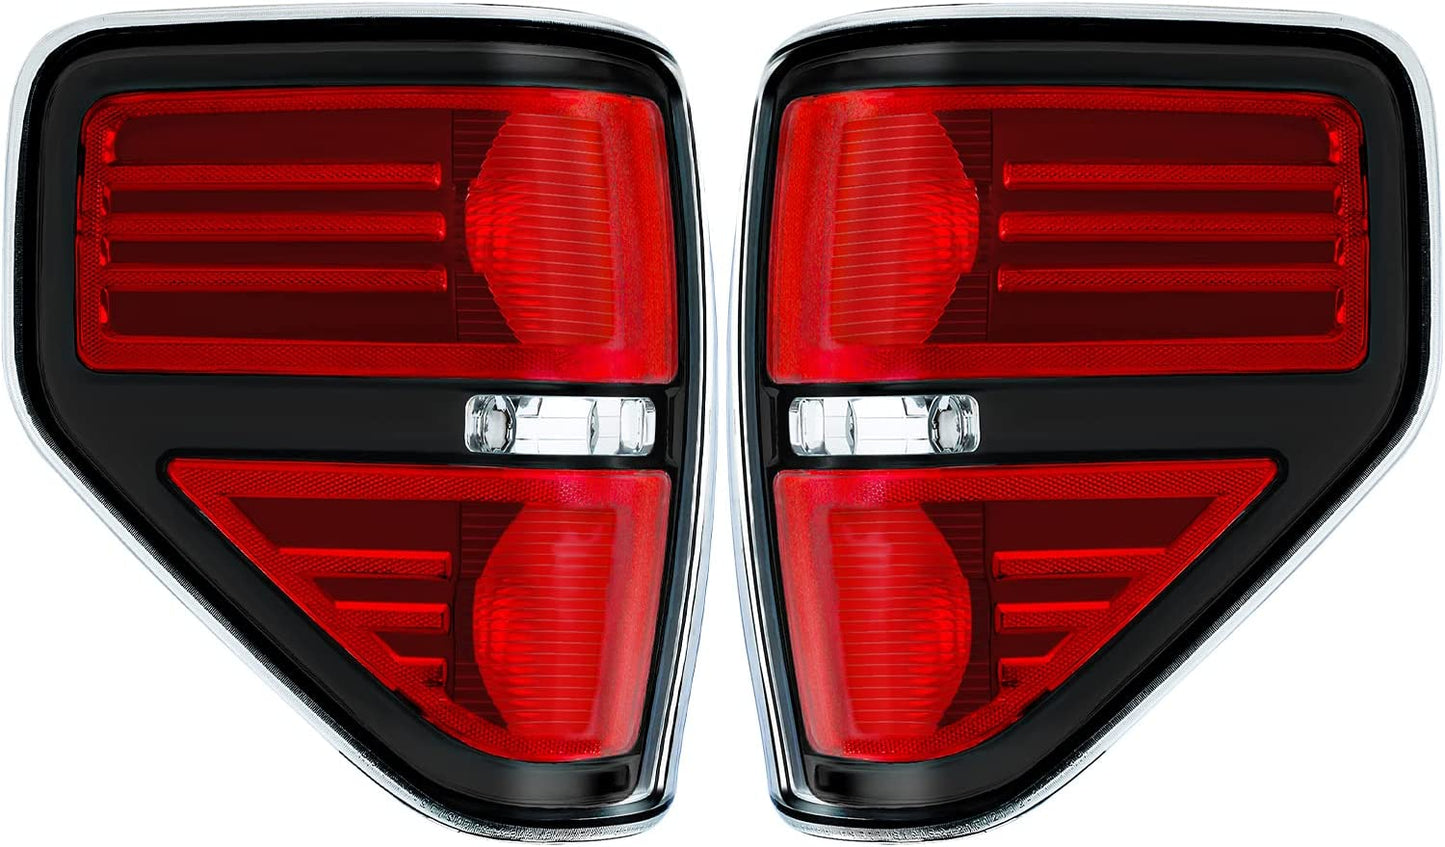 09-14 Ford F-150 Tail Light Assembly（a pair）